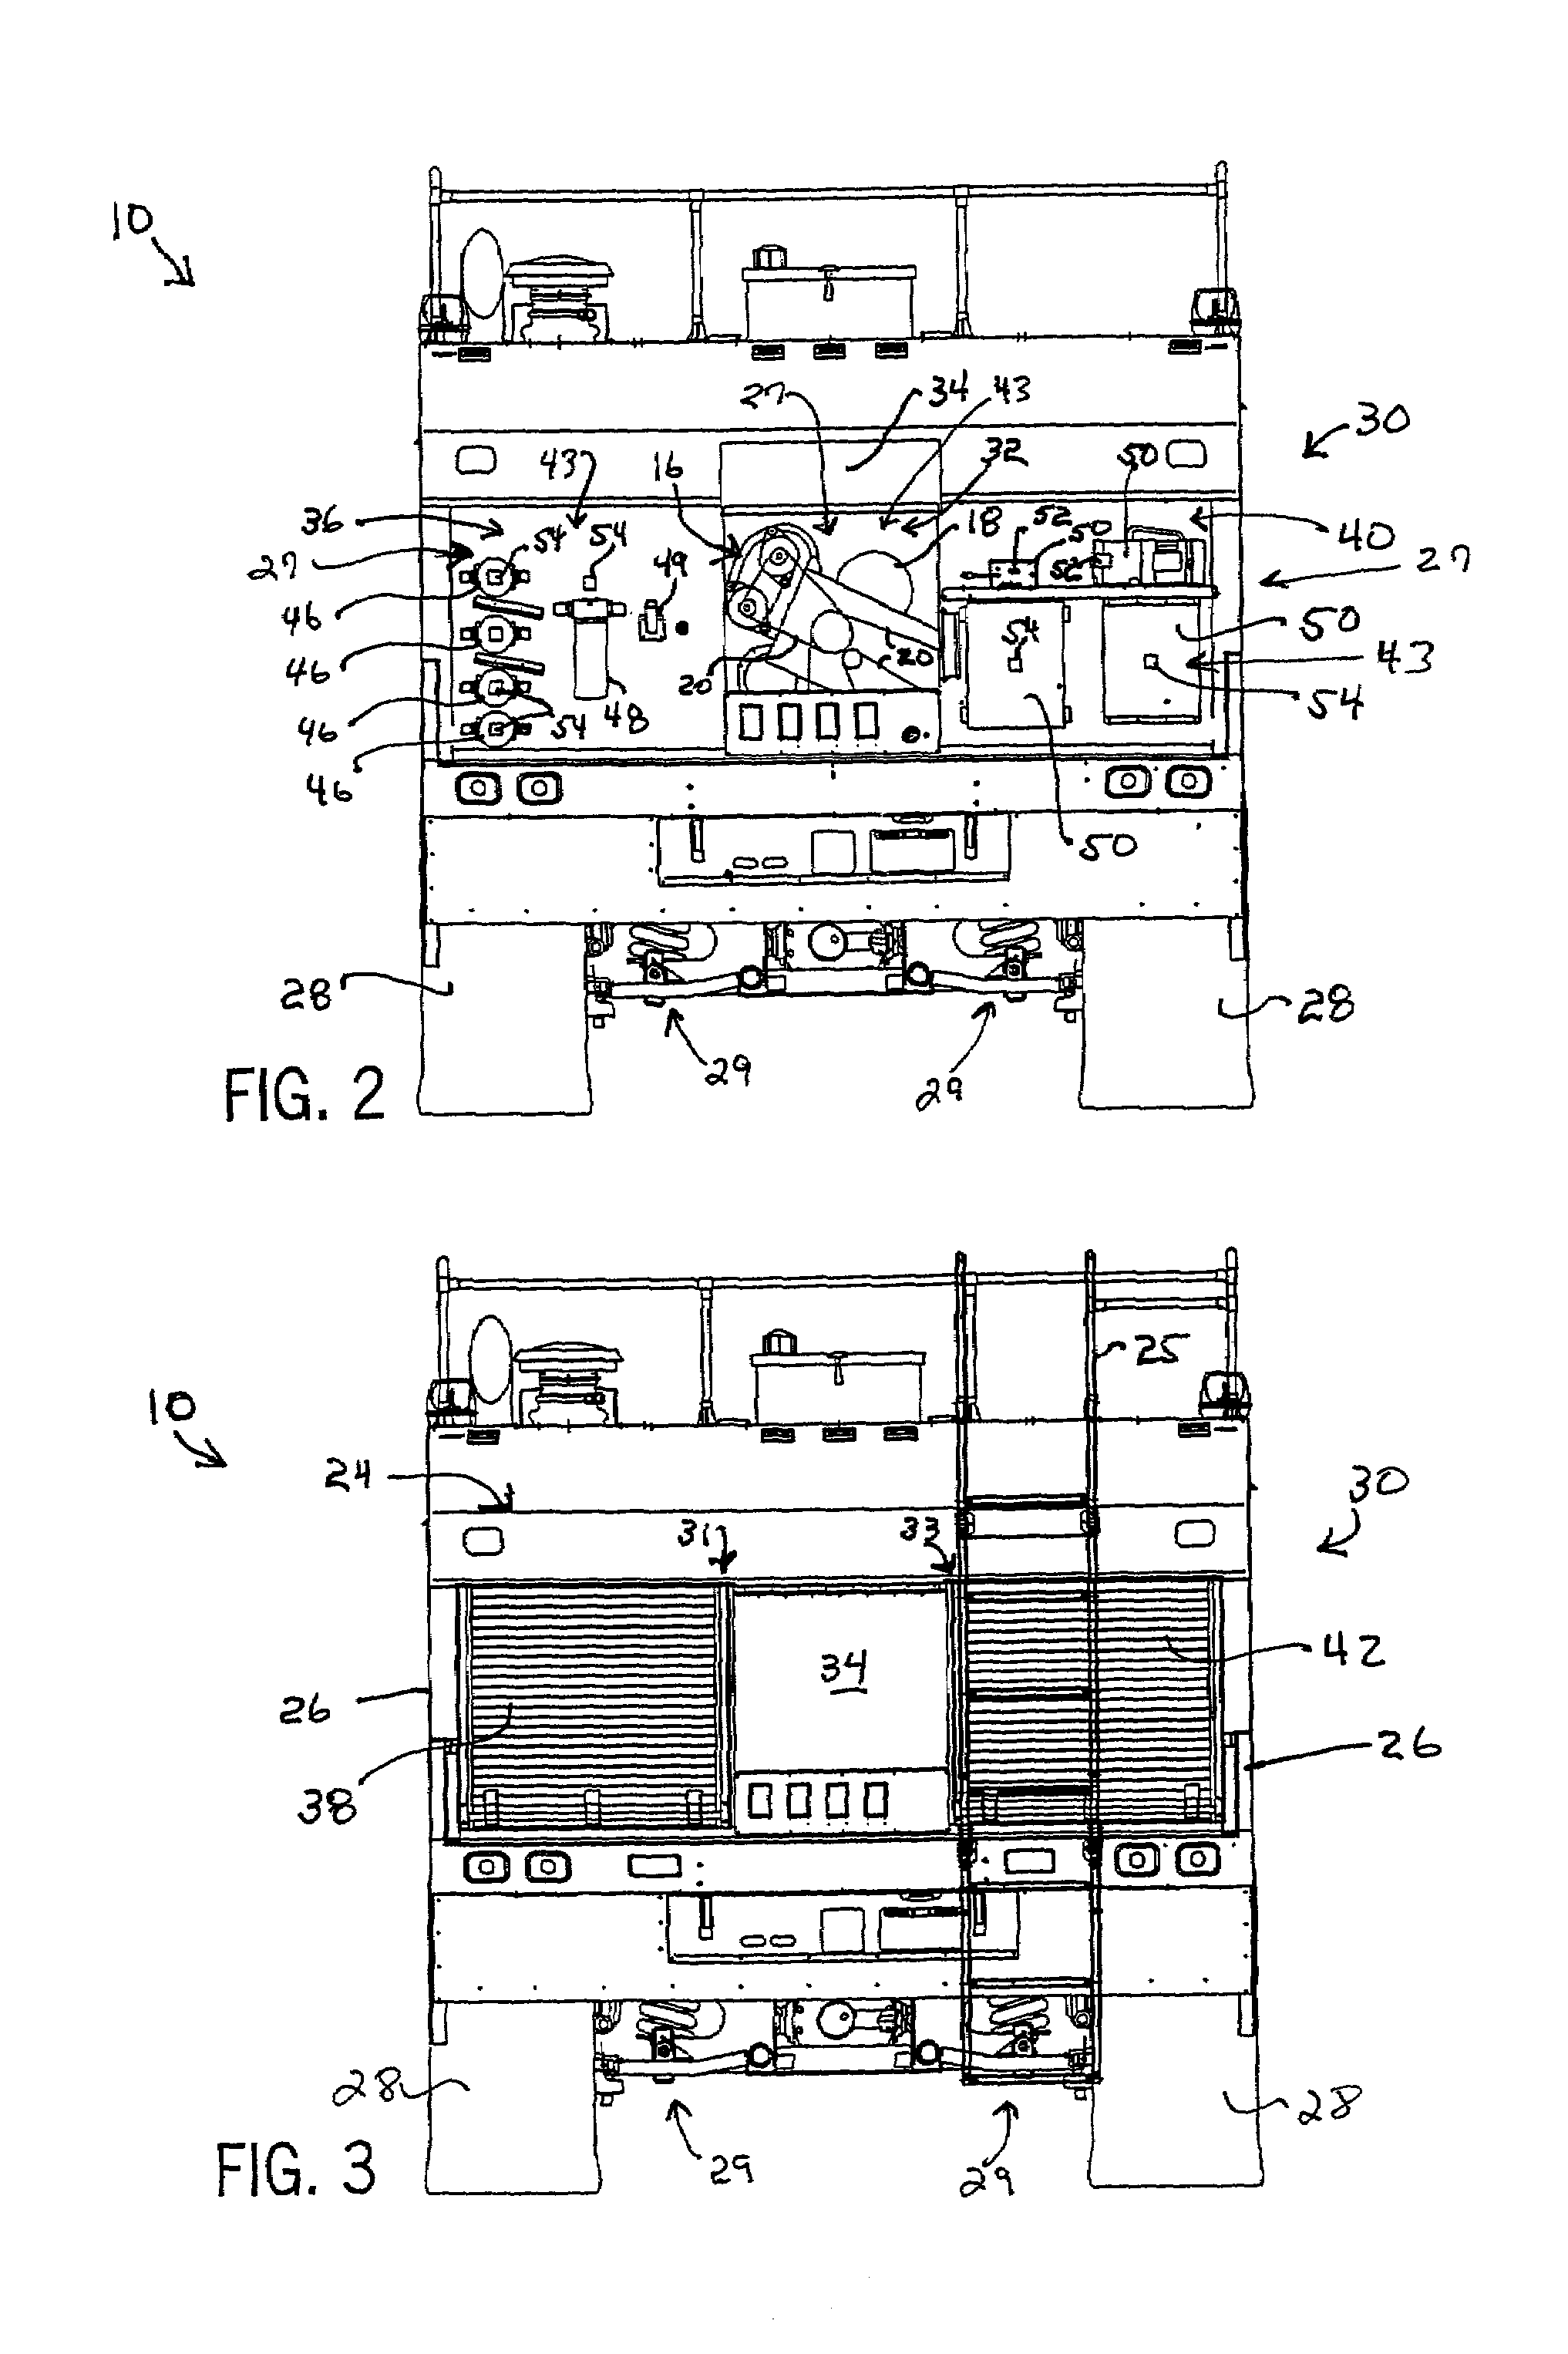 Apparatus and method to facilitate maintenance of a work vehicle